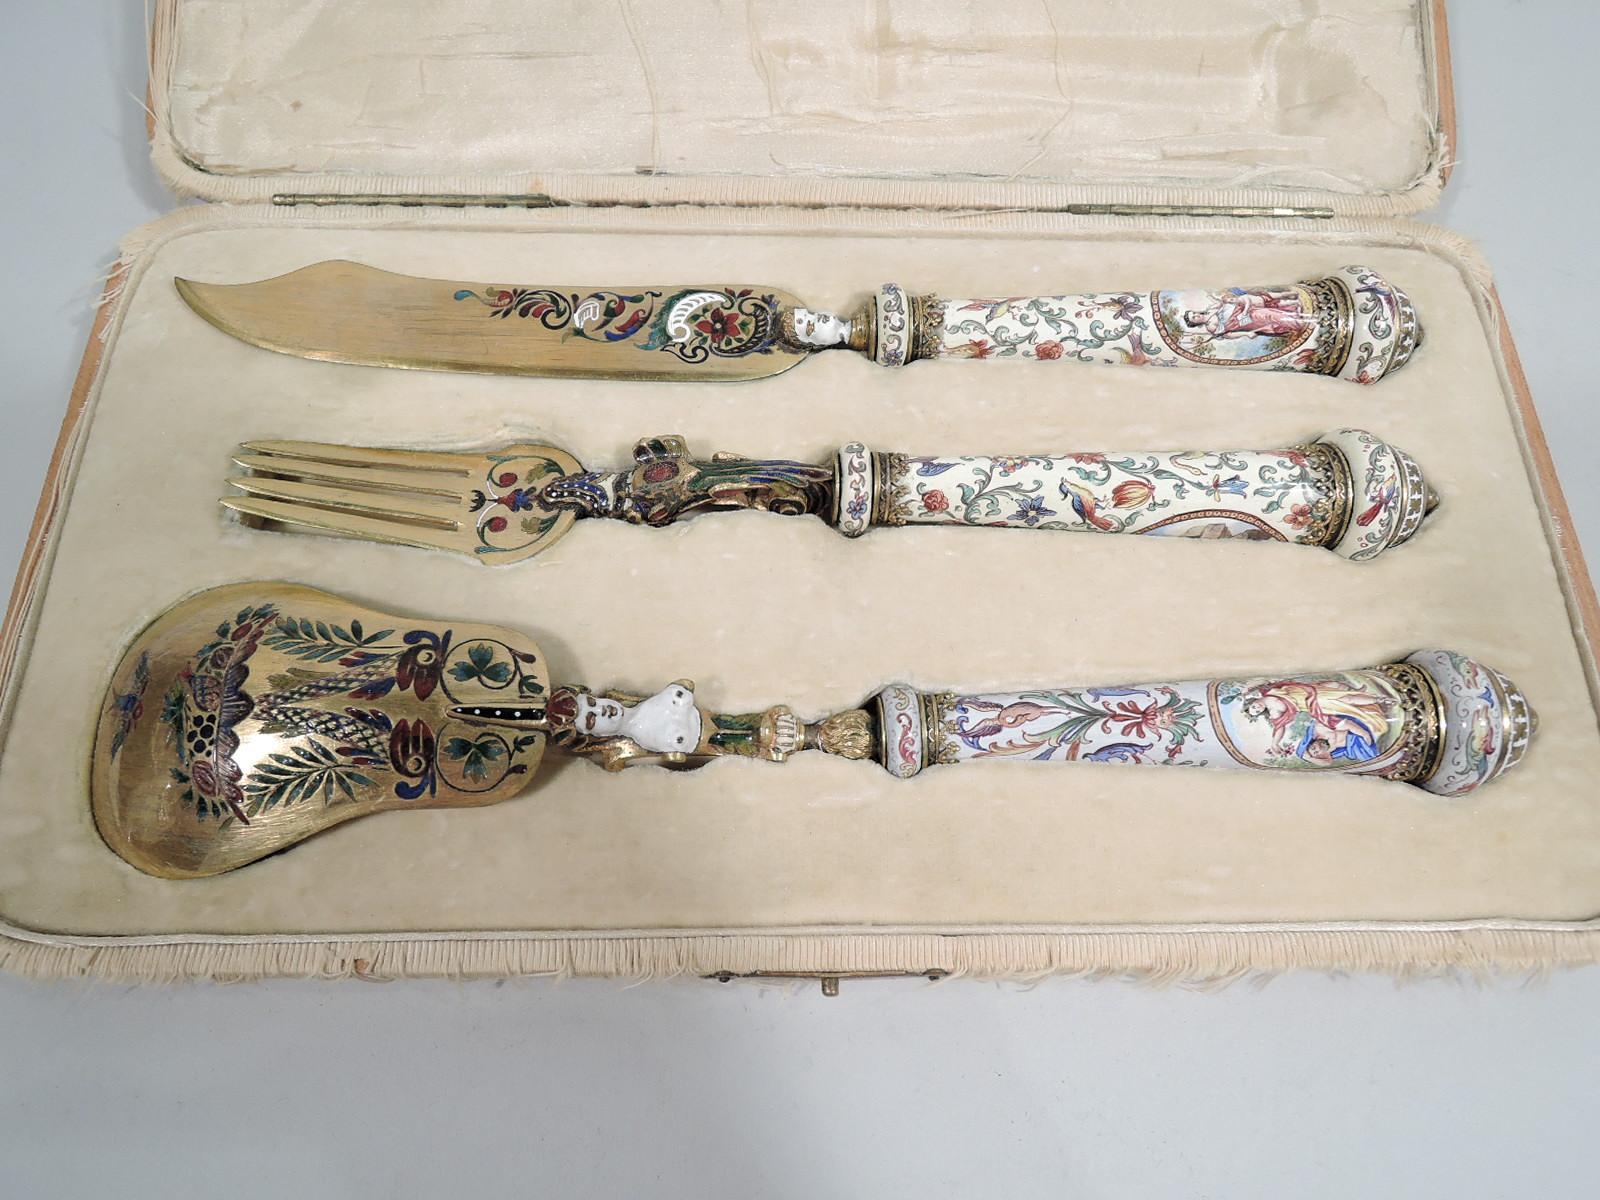 Italian Renaissance-Revival 3-piece gilt brass and enamel serving set, ca. 1860. This set comprises spoon, fork, and knife.

The handles are straight and tapering with knops and enameled grotesque ornament on white ground. The spoon has shaped